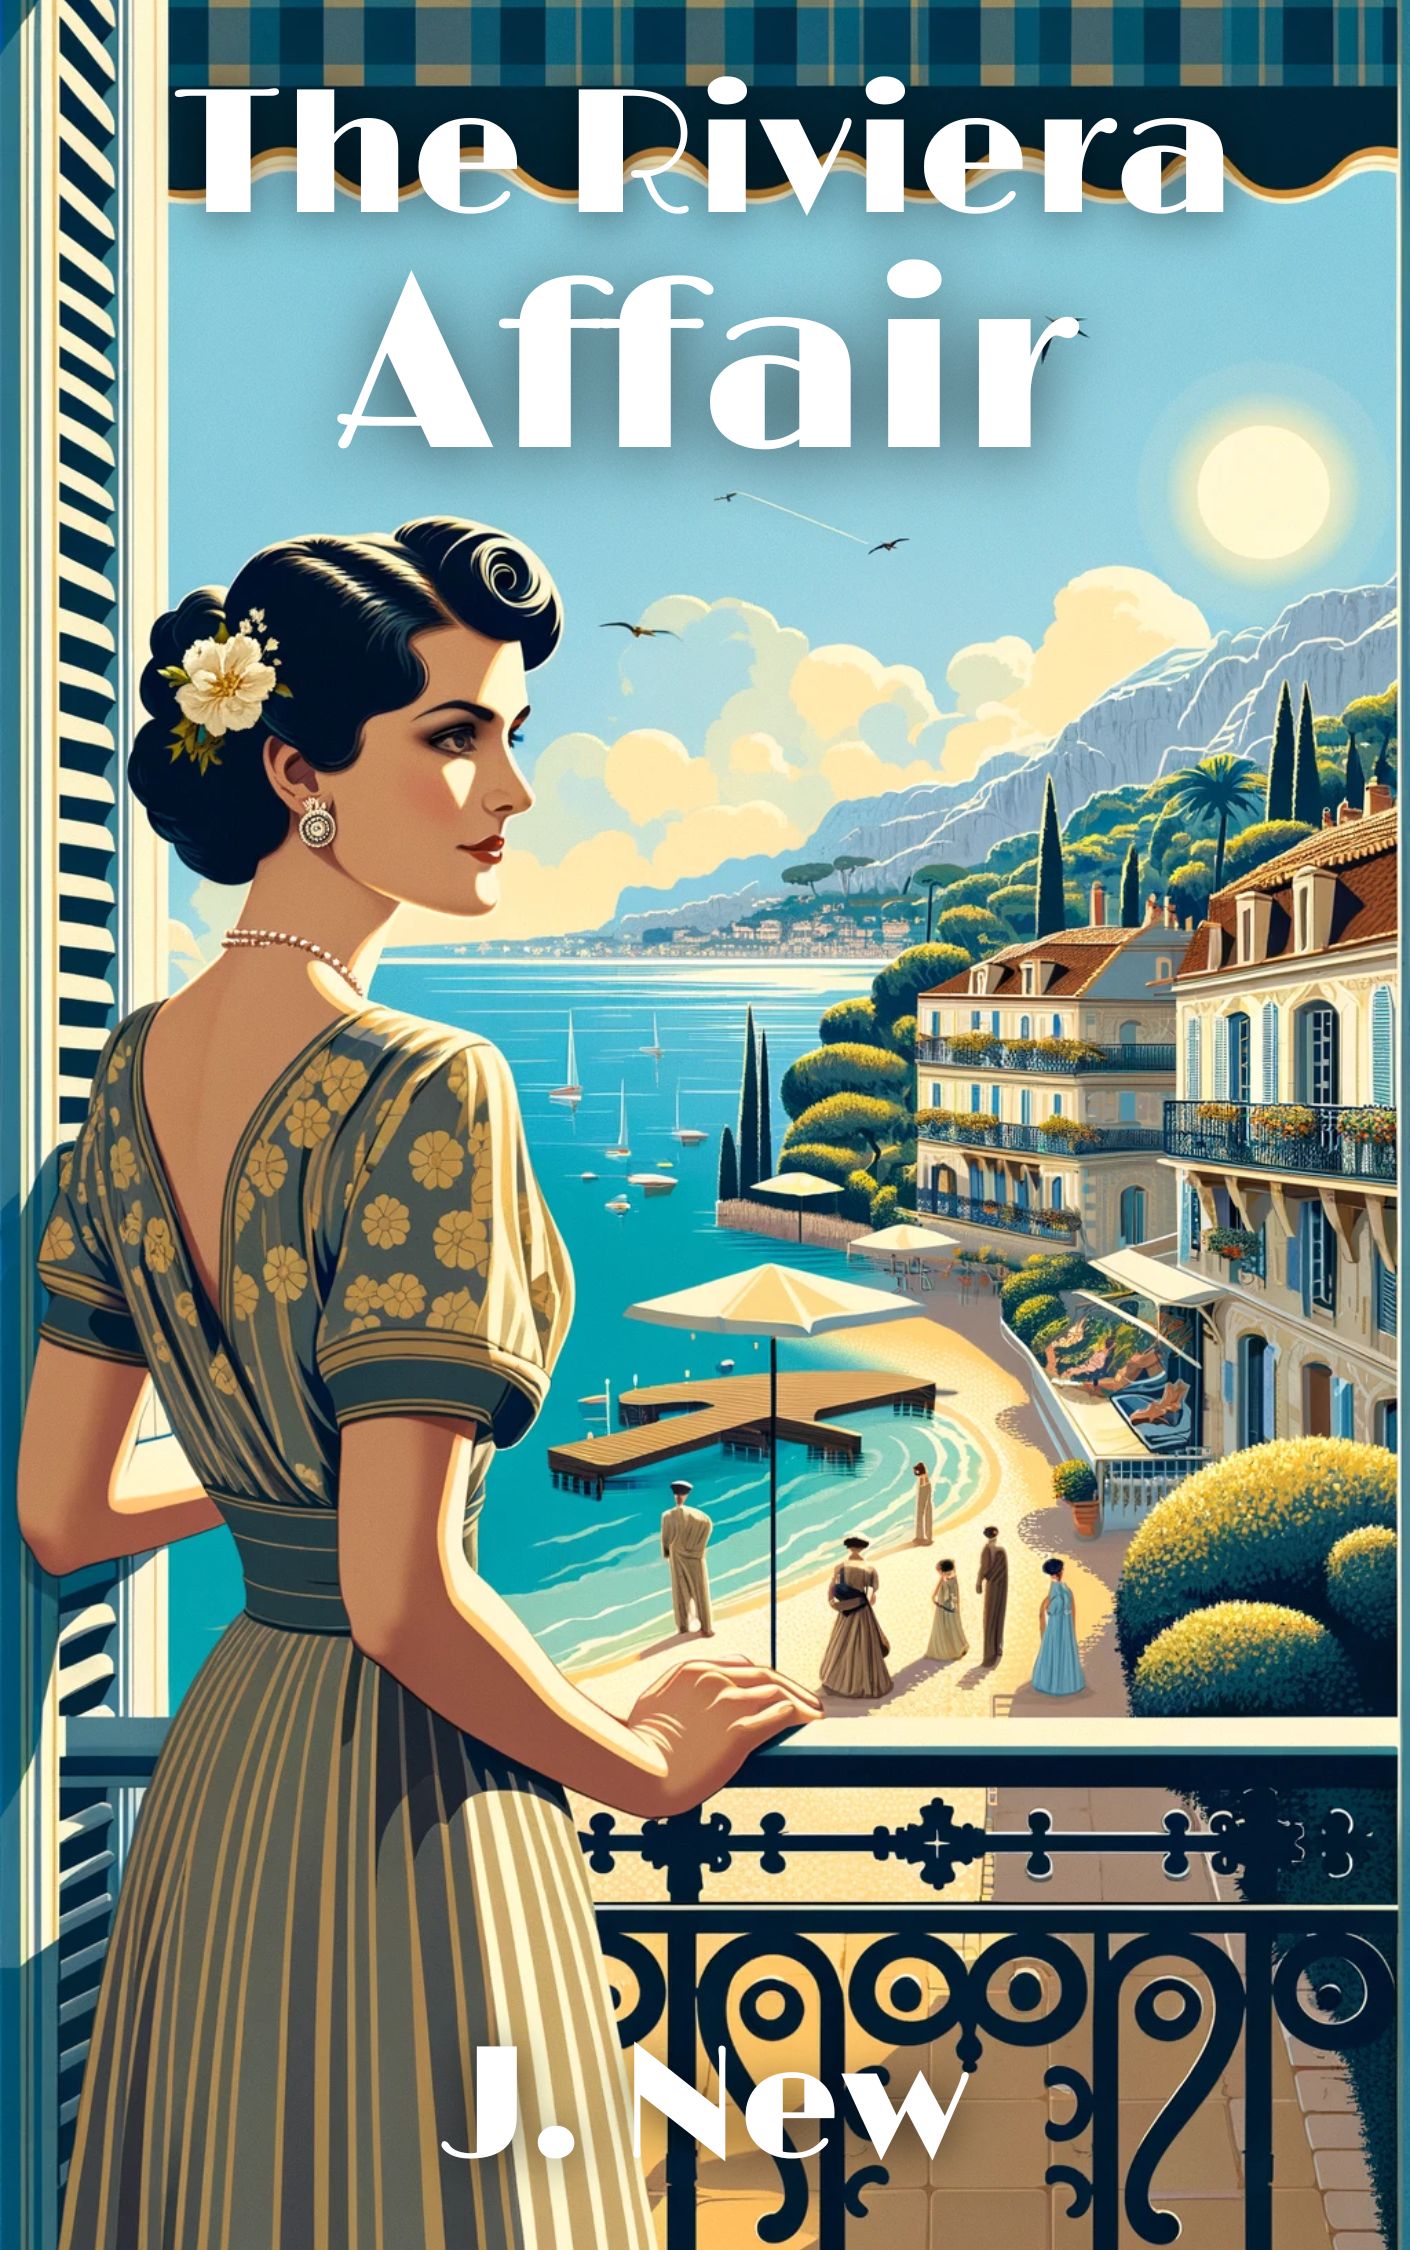 The Riviera Affair book 4 in the hugely popular cozy British historical mystery series set in England in the 1930s by British author J. New